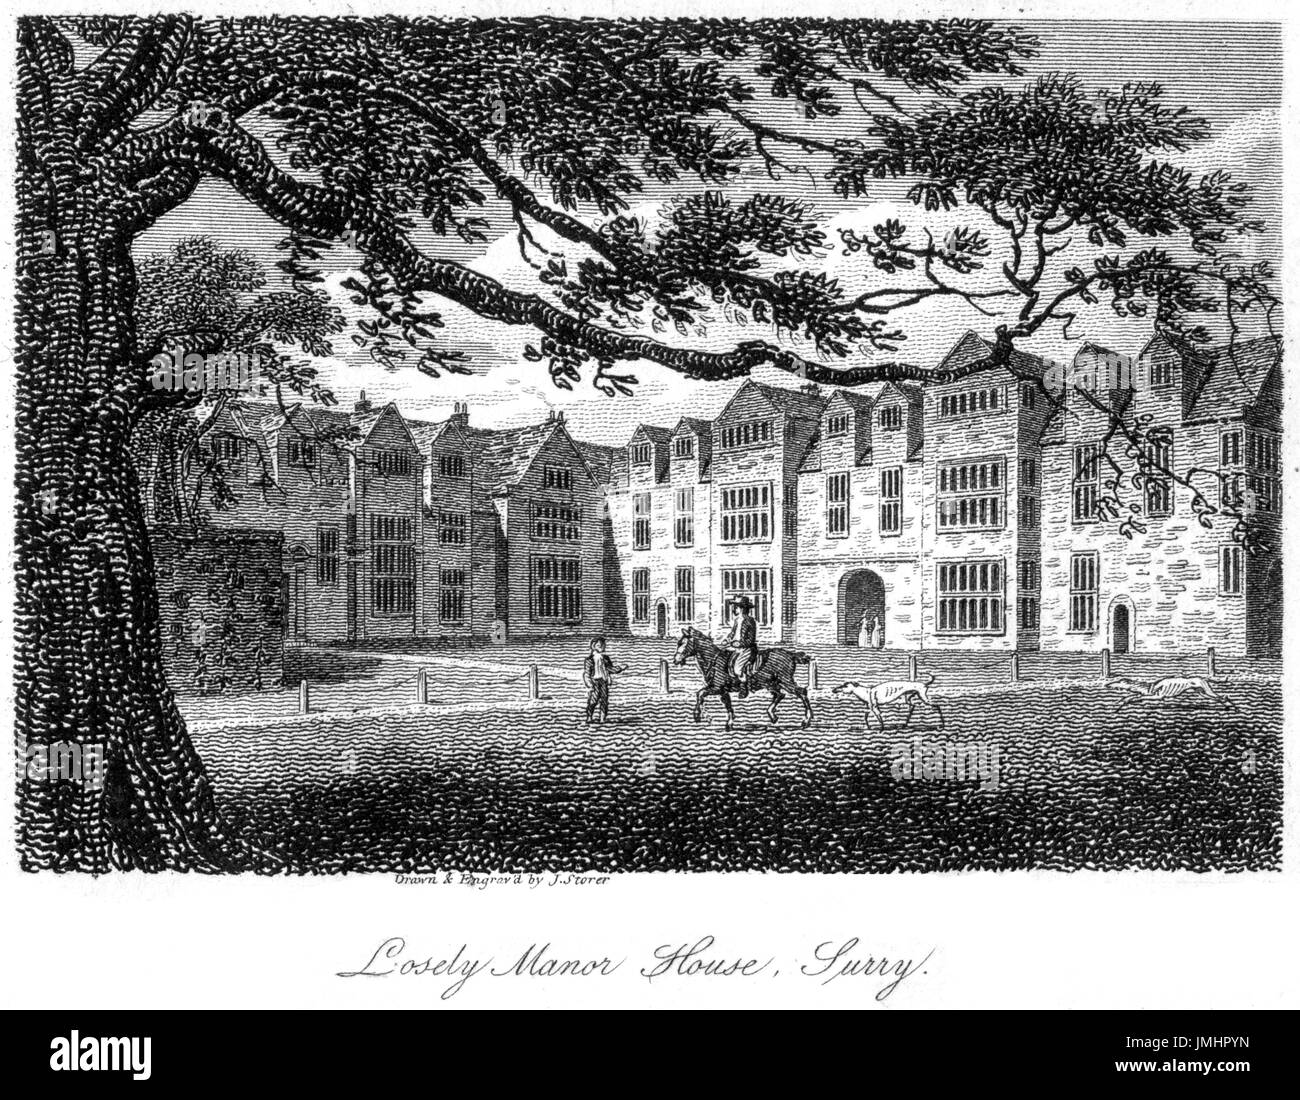 An engraving of Losely Manor House, Surry (Loseley Park, Surrey) scanned at high resolution from a book printed in 1808.  Believed copyright free. Stock Photo